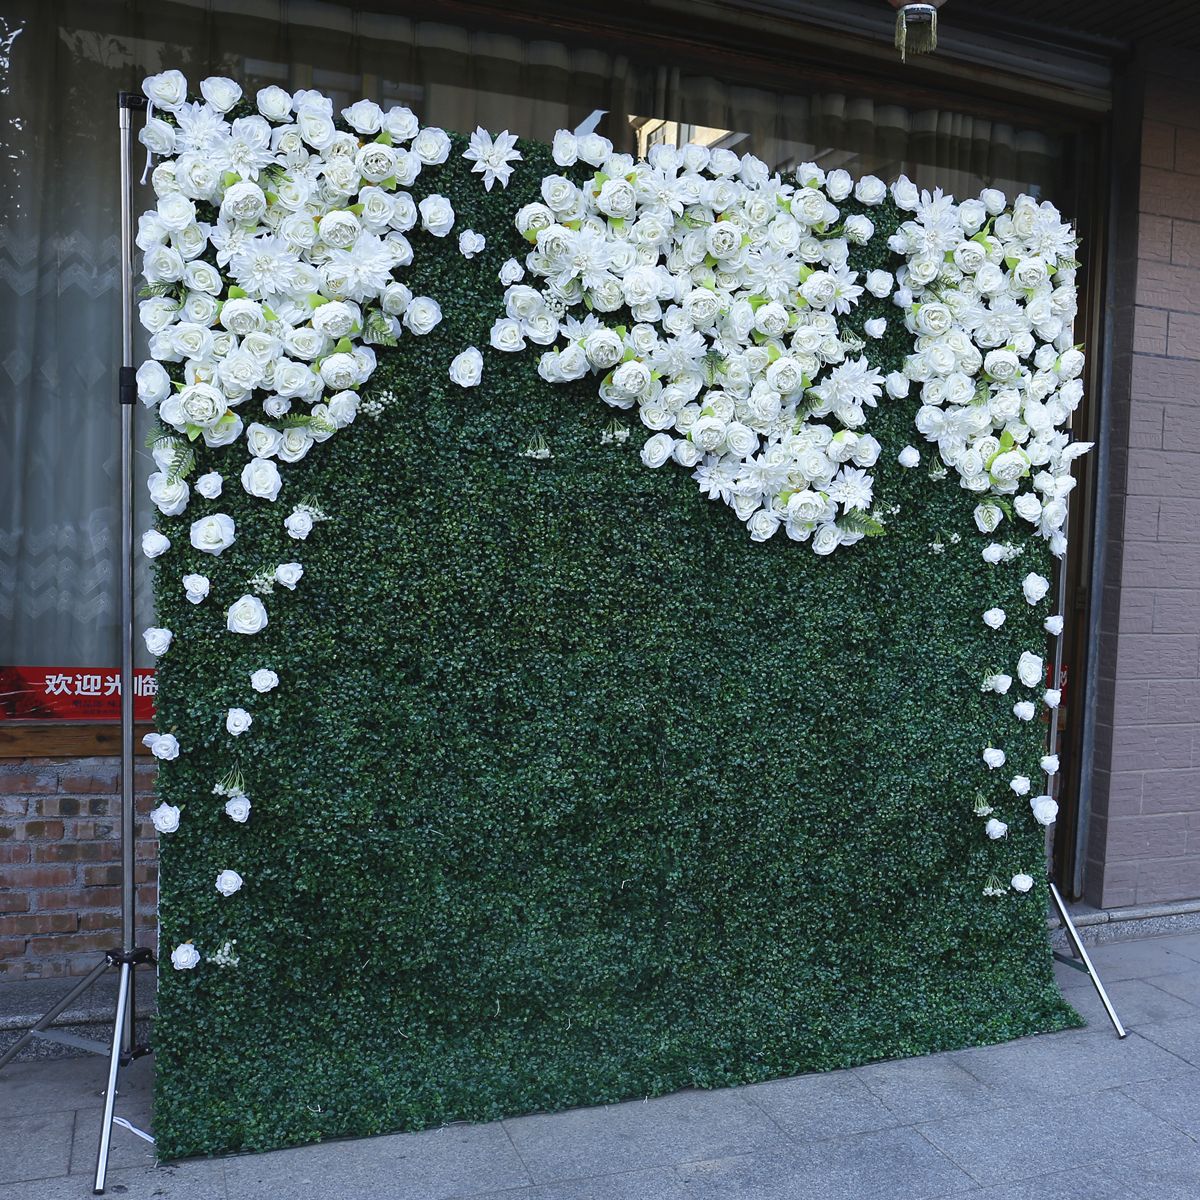 Simulated plant green plant background wall wedding decoration wedding decoration white cloth bottom floral wall